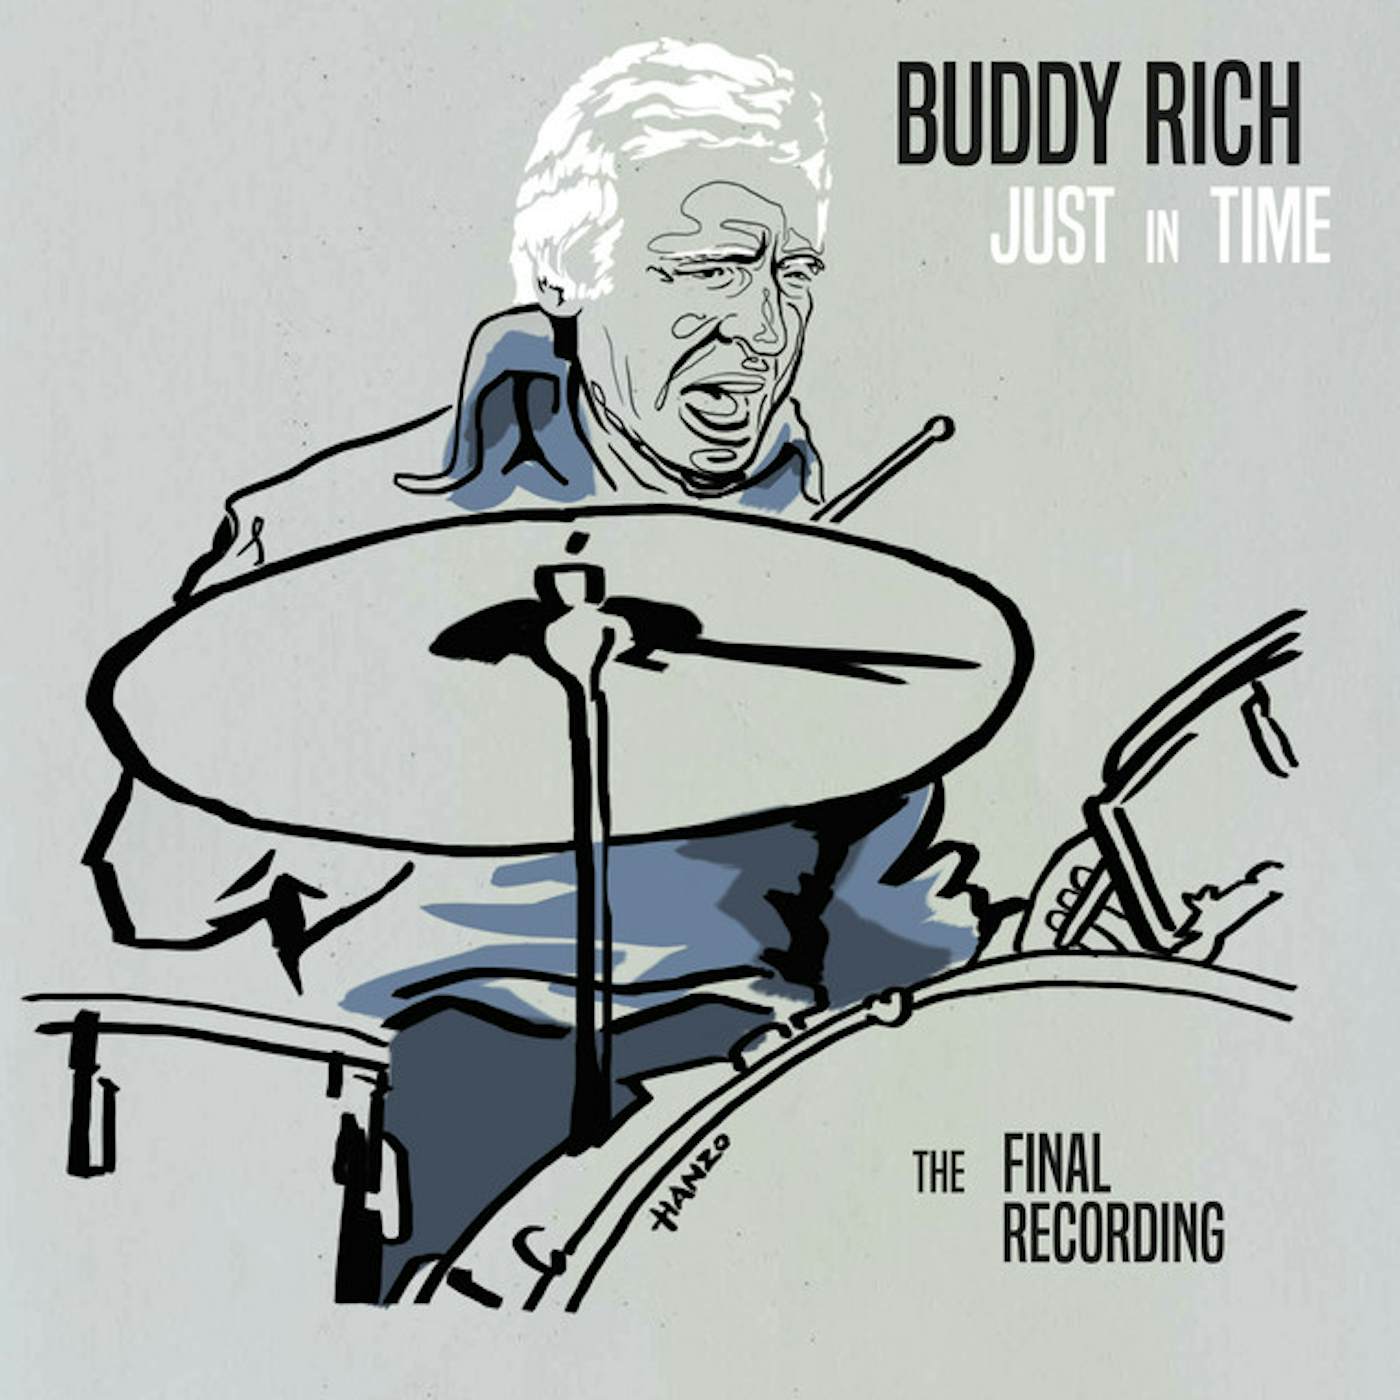 Buddy Rich JUST IN TIME - THE FINAL RECORDING CD